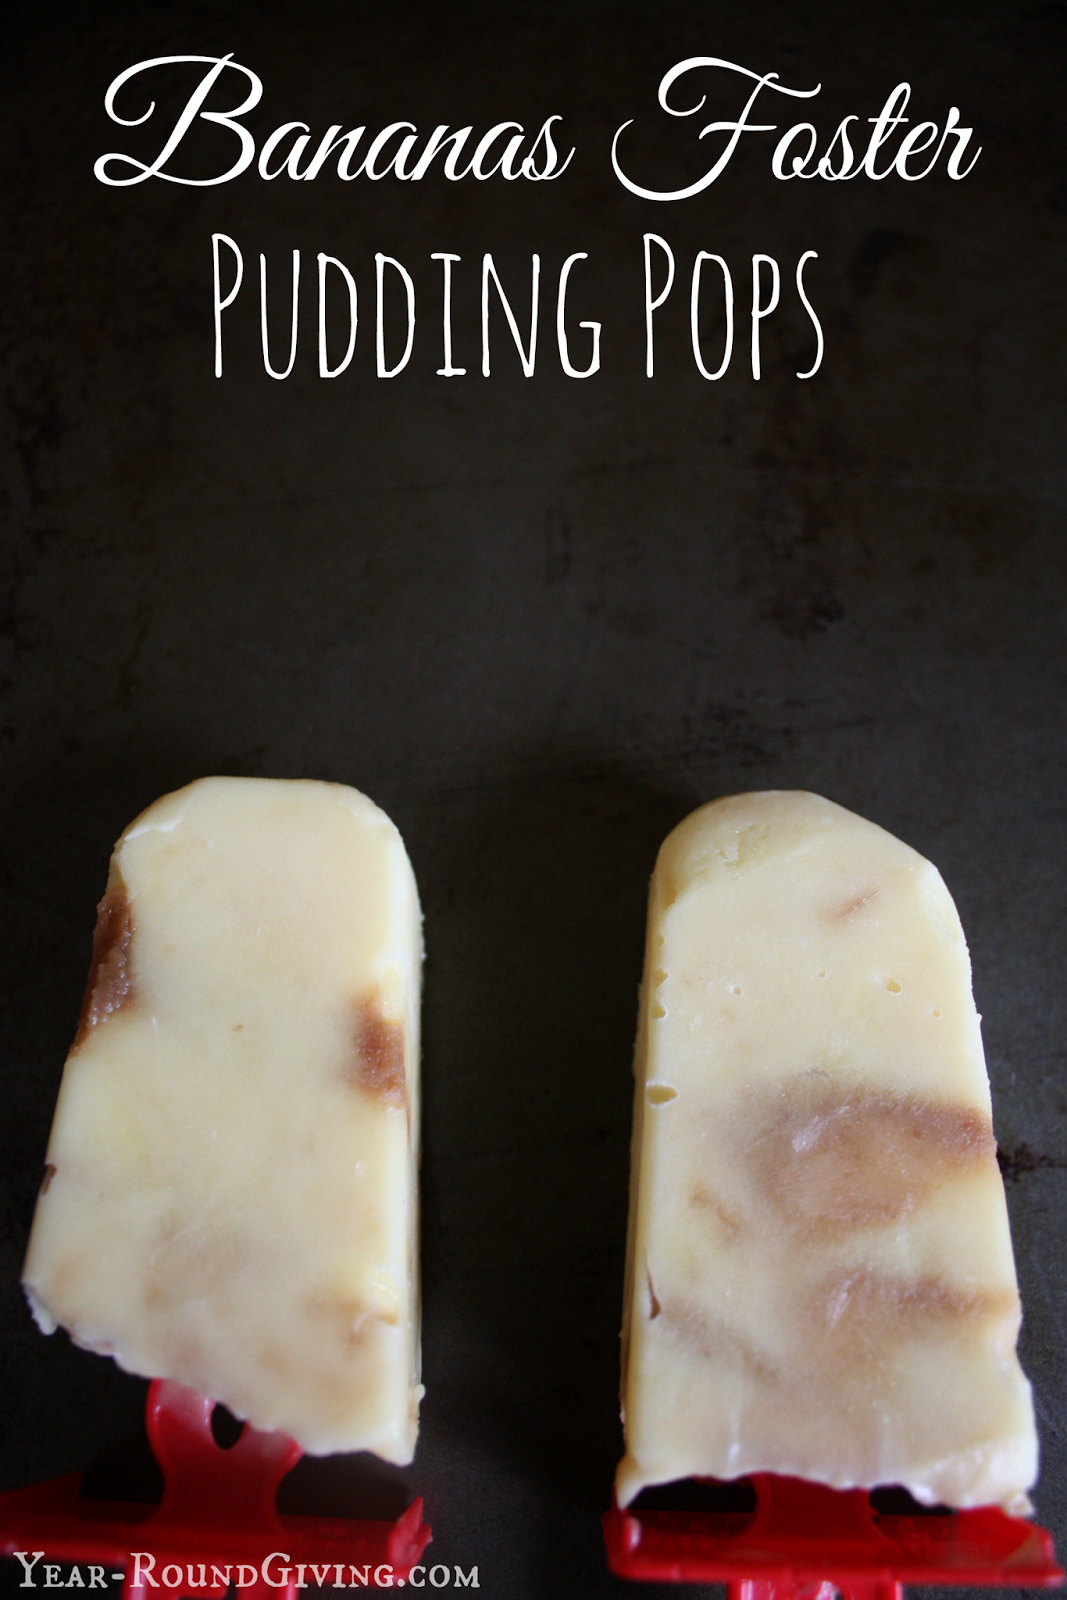 Bananas Foster Pudding Pops